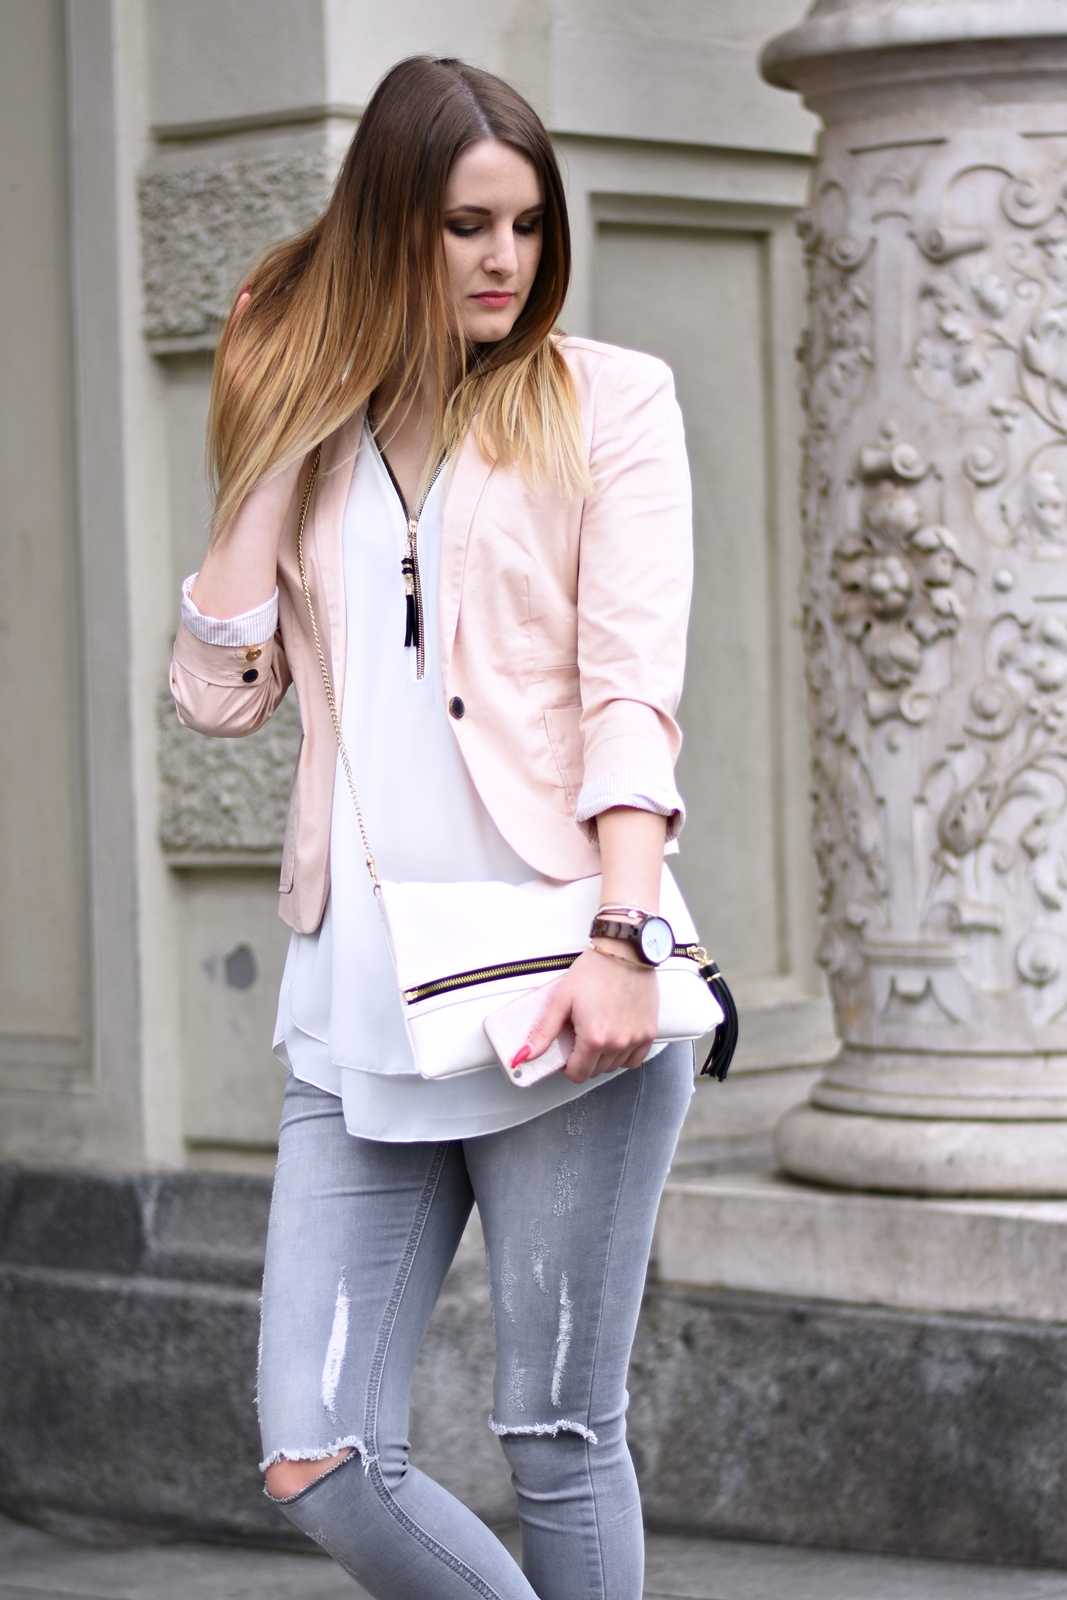 Pretty in Pastell - Pastell Look - Outfit - Mode - Frühling - Modeblog - Fashionblog - Fashionladyloves Blog